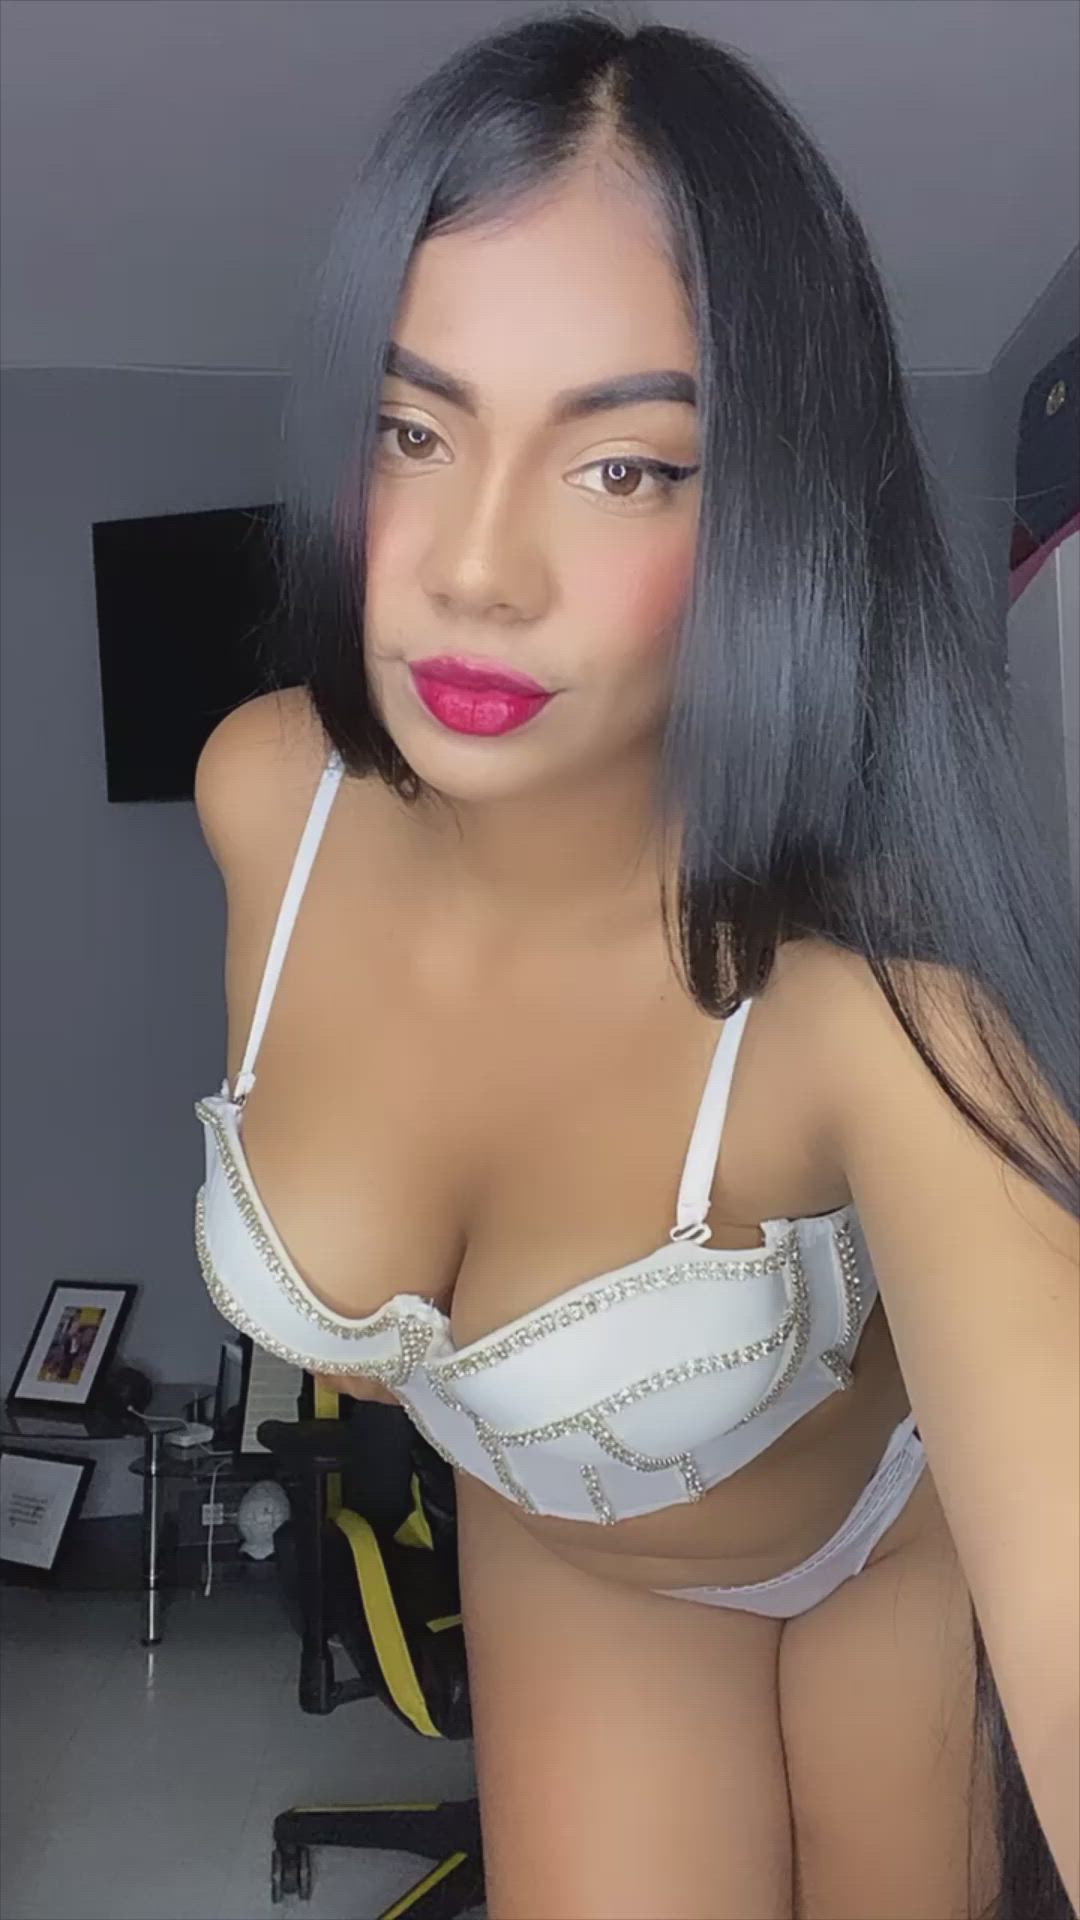 Latina porn video with onlyfans model iammarcela <strong>@marcelagarcia22</strong>